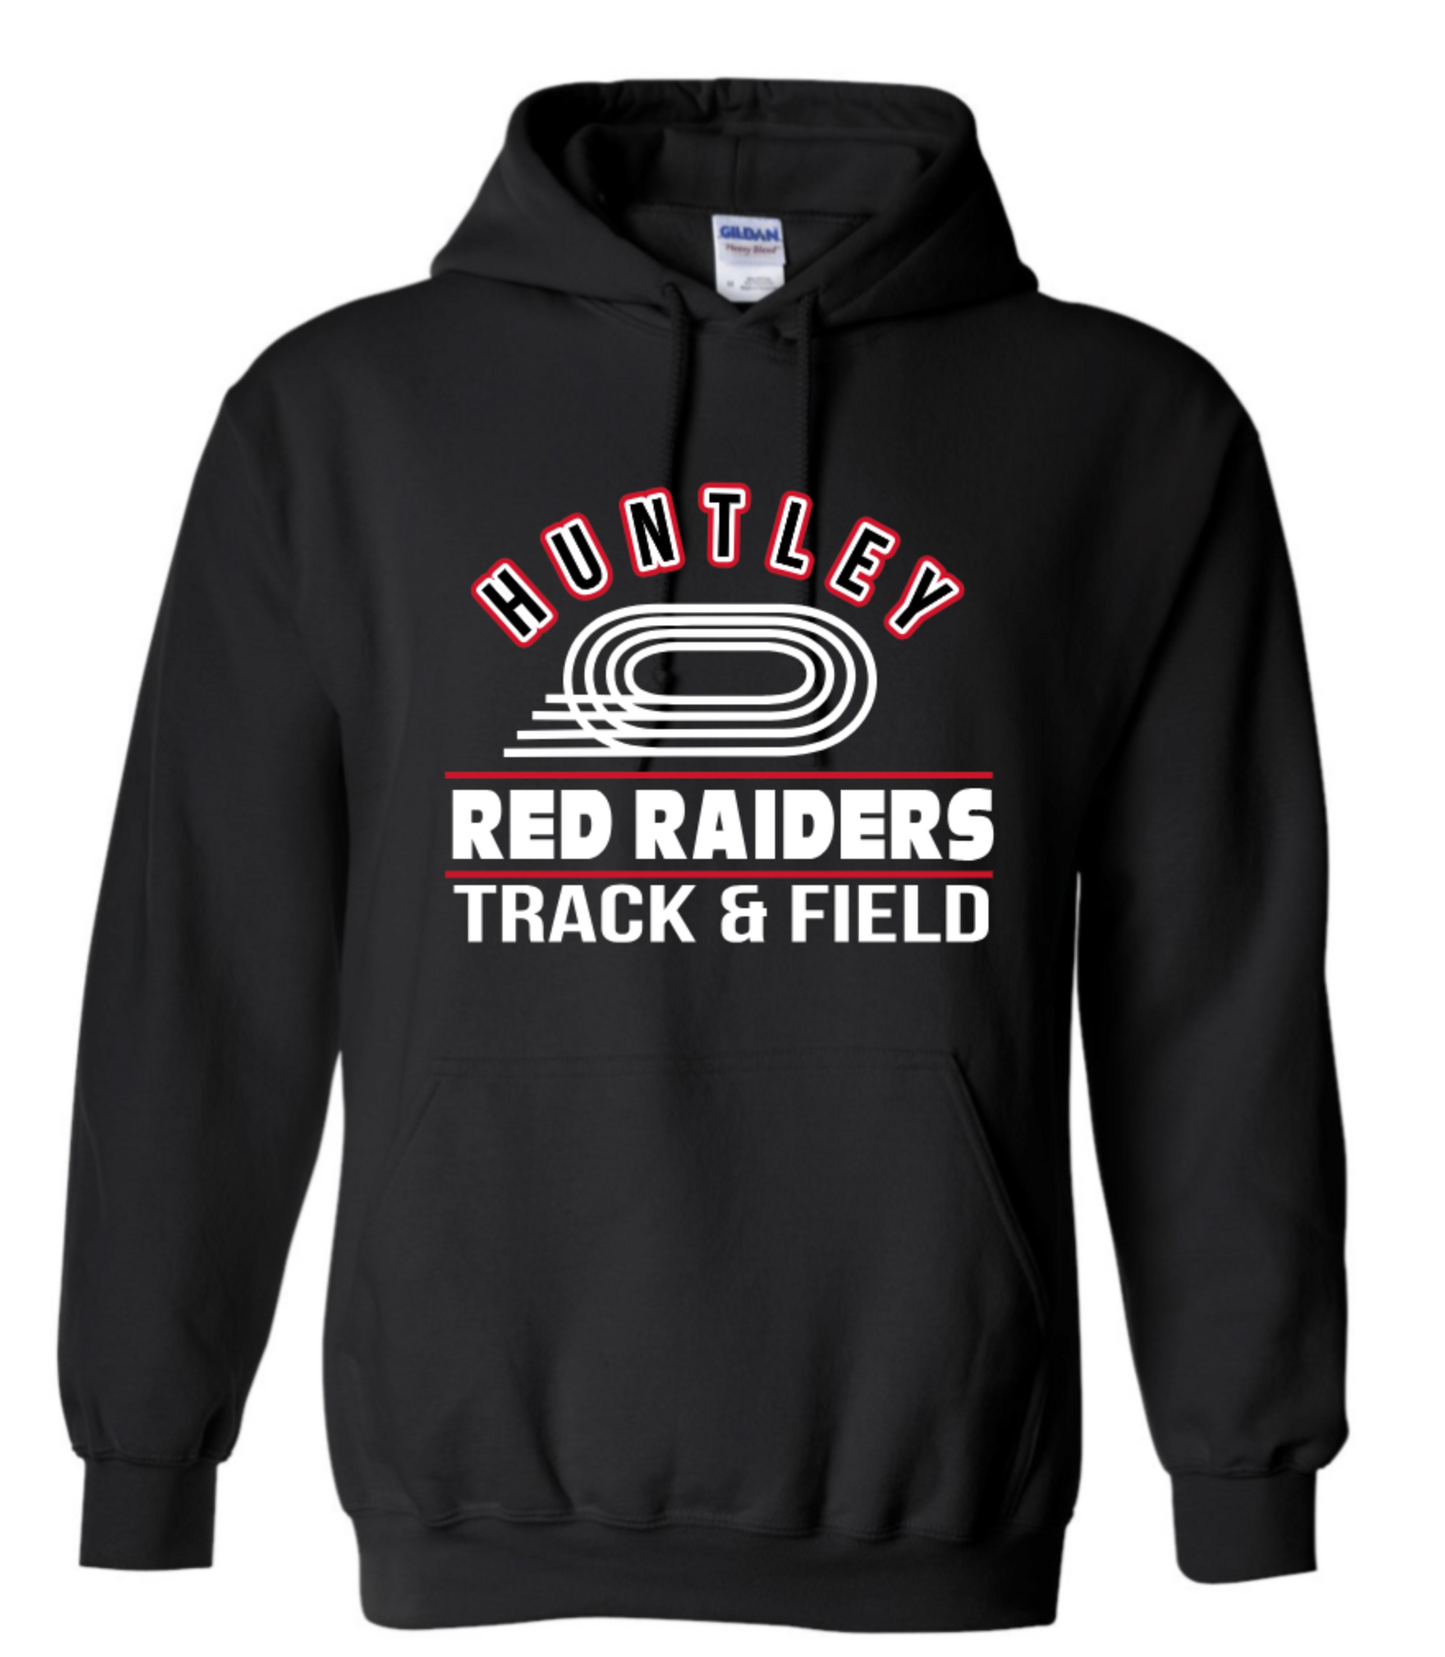 RED RAIDERS TRACK & FIELD JOGGER SET